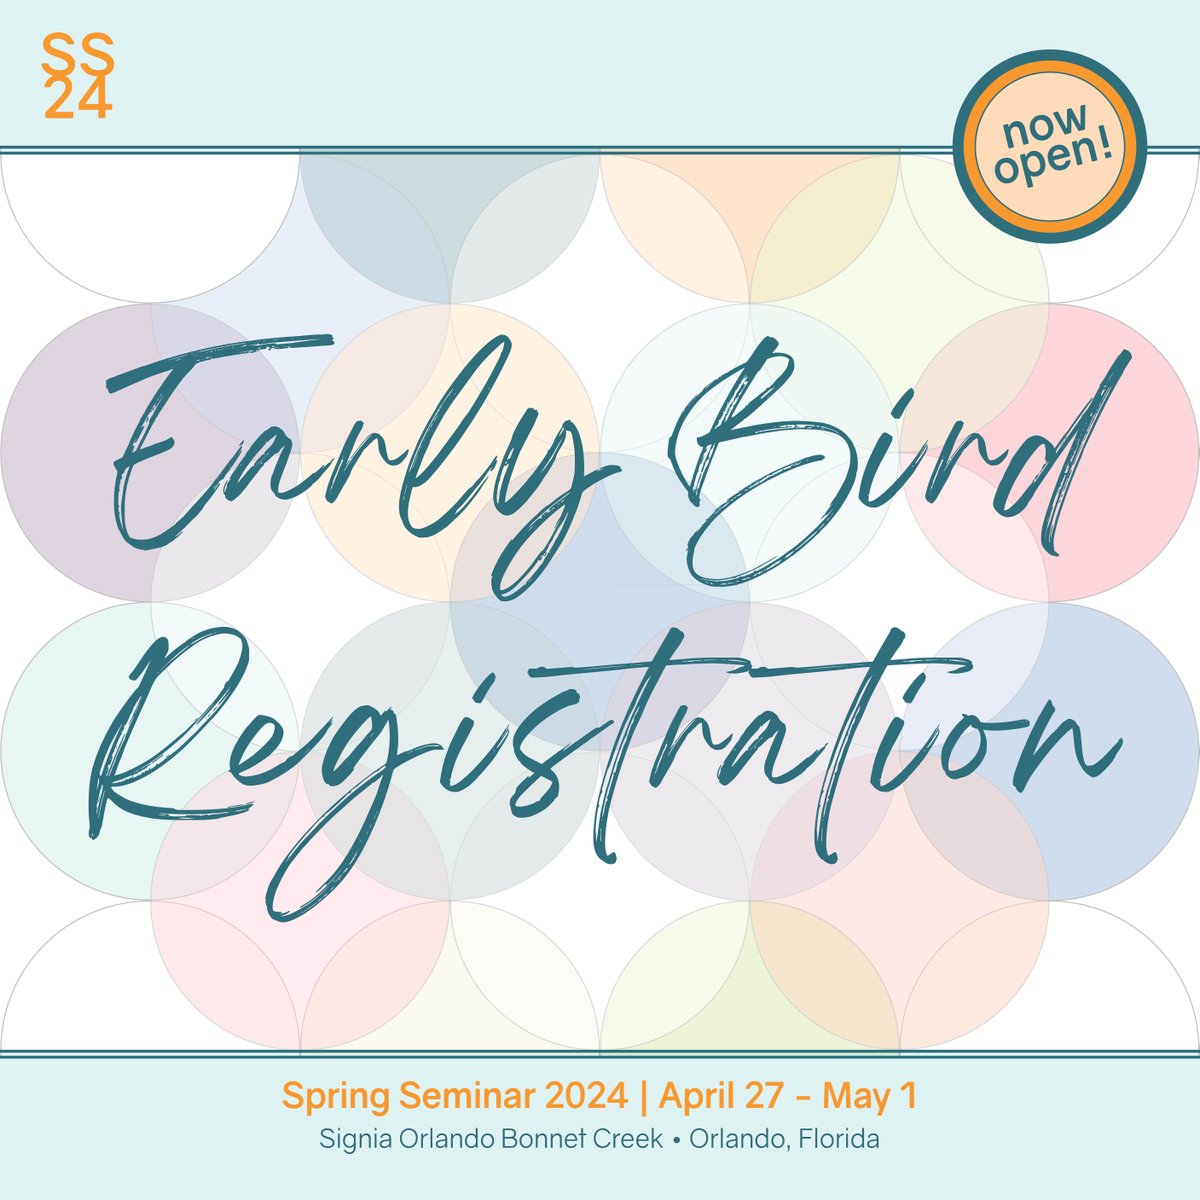 Spring Seminar Registration is Open! We hope you can join us in Orlando April 27-May 1. Save by registering before the Early Bird Rate Expires. ss24.events.acoep.org #ACOEP24